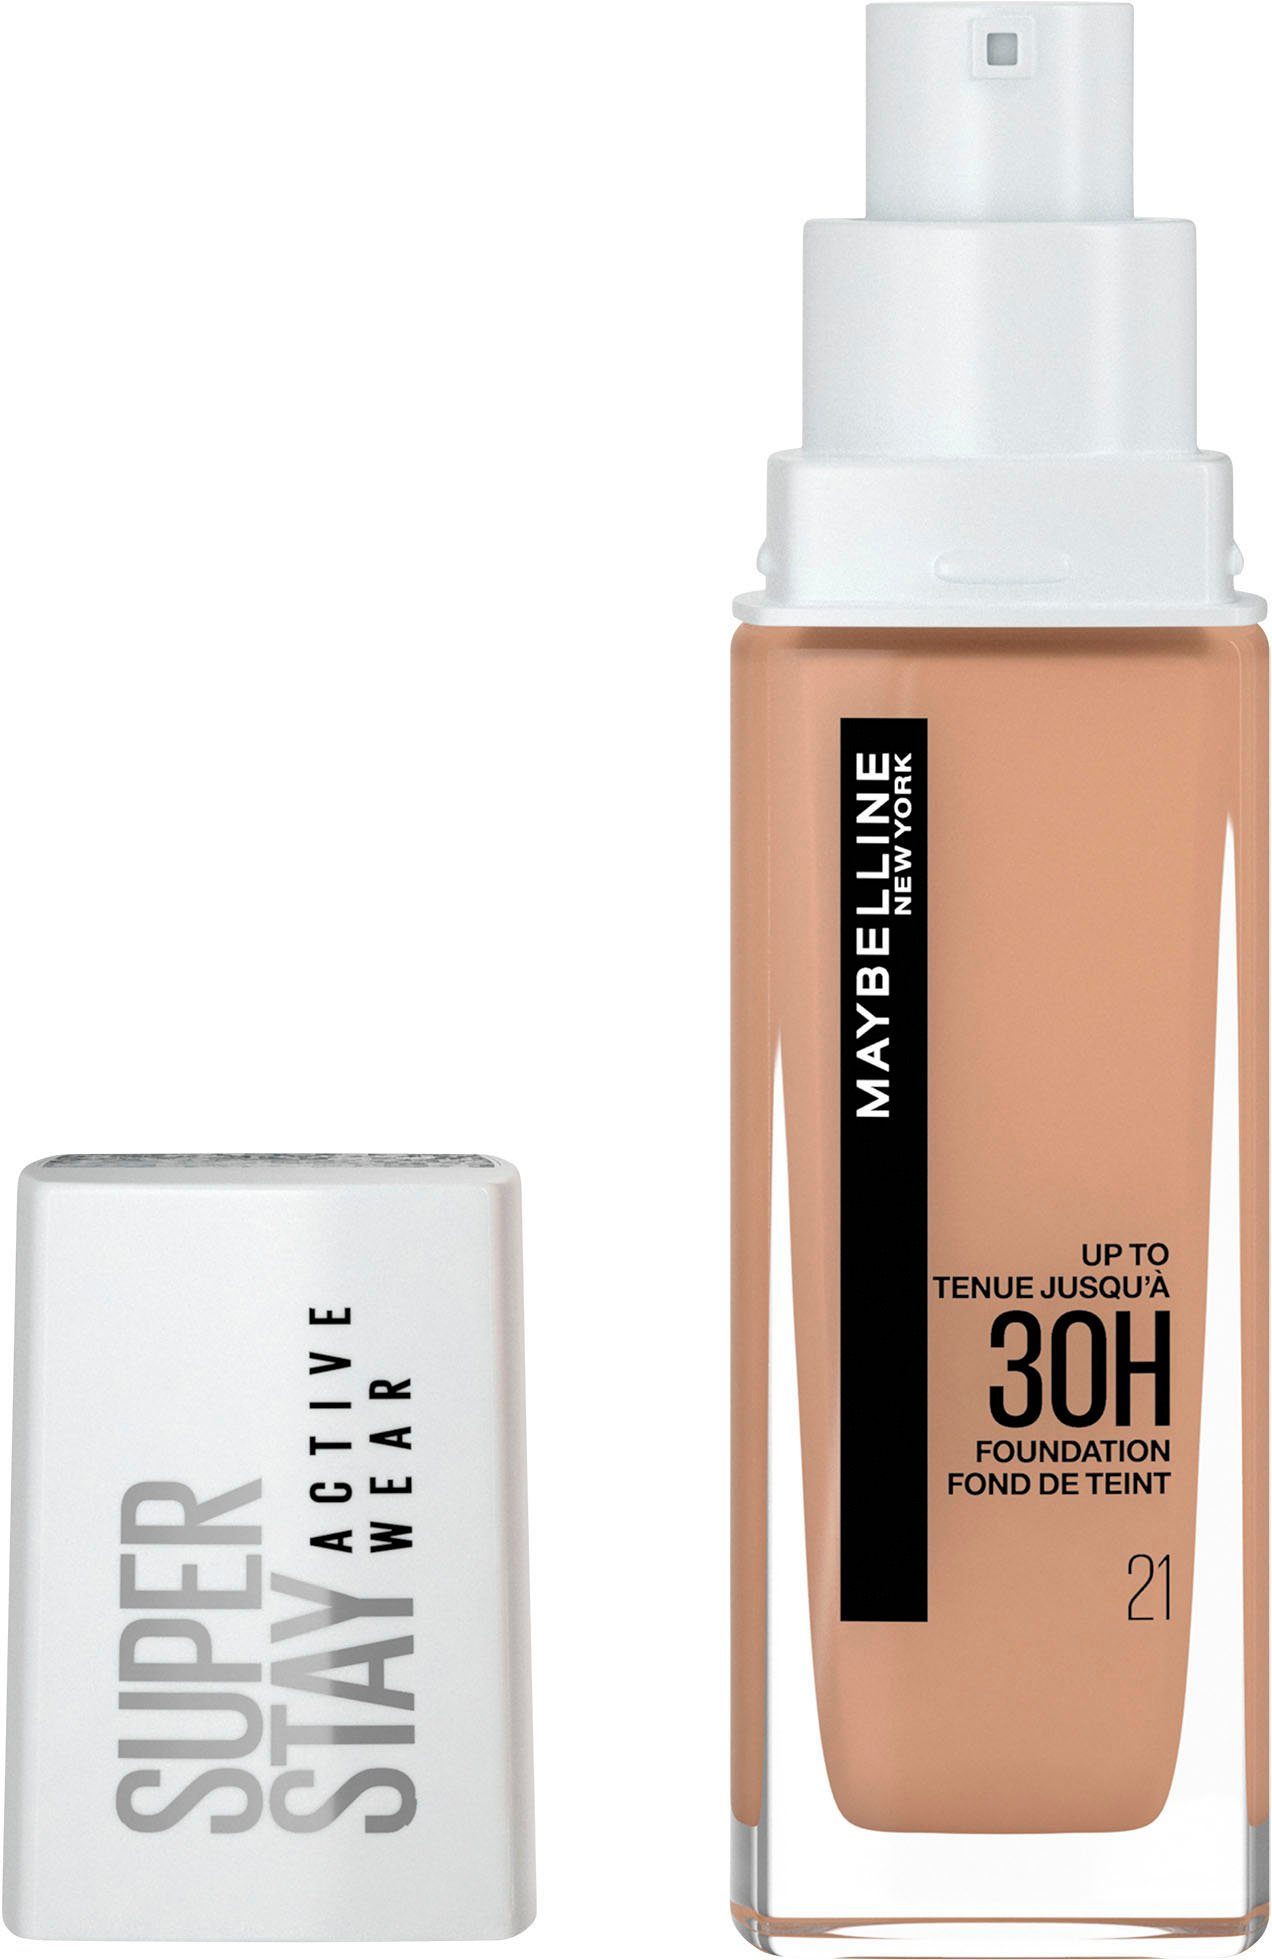 YORK Nude Stay Active Beige 21 MAYBELLINE NEW Wear Foundation Super